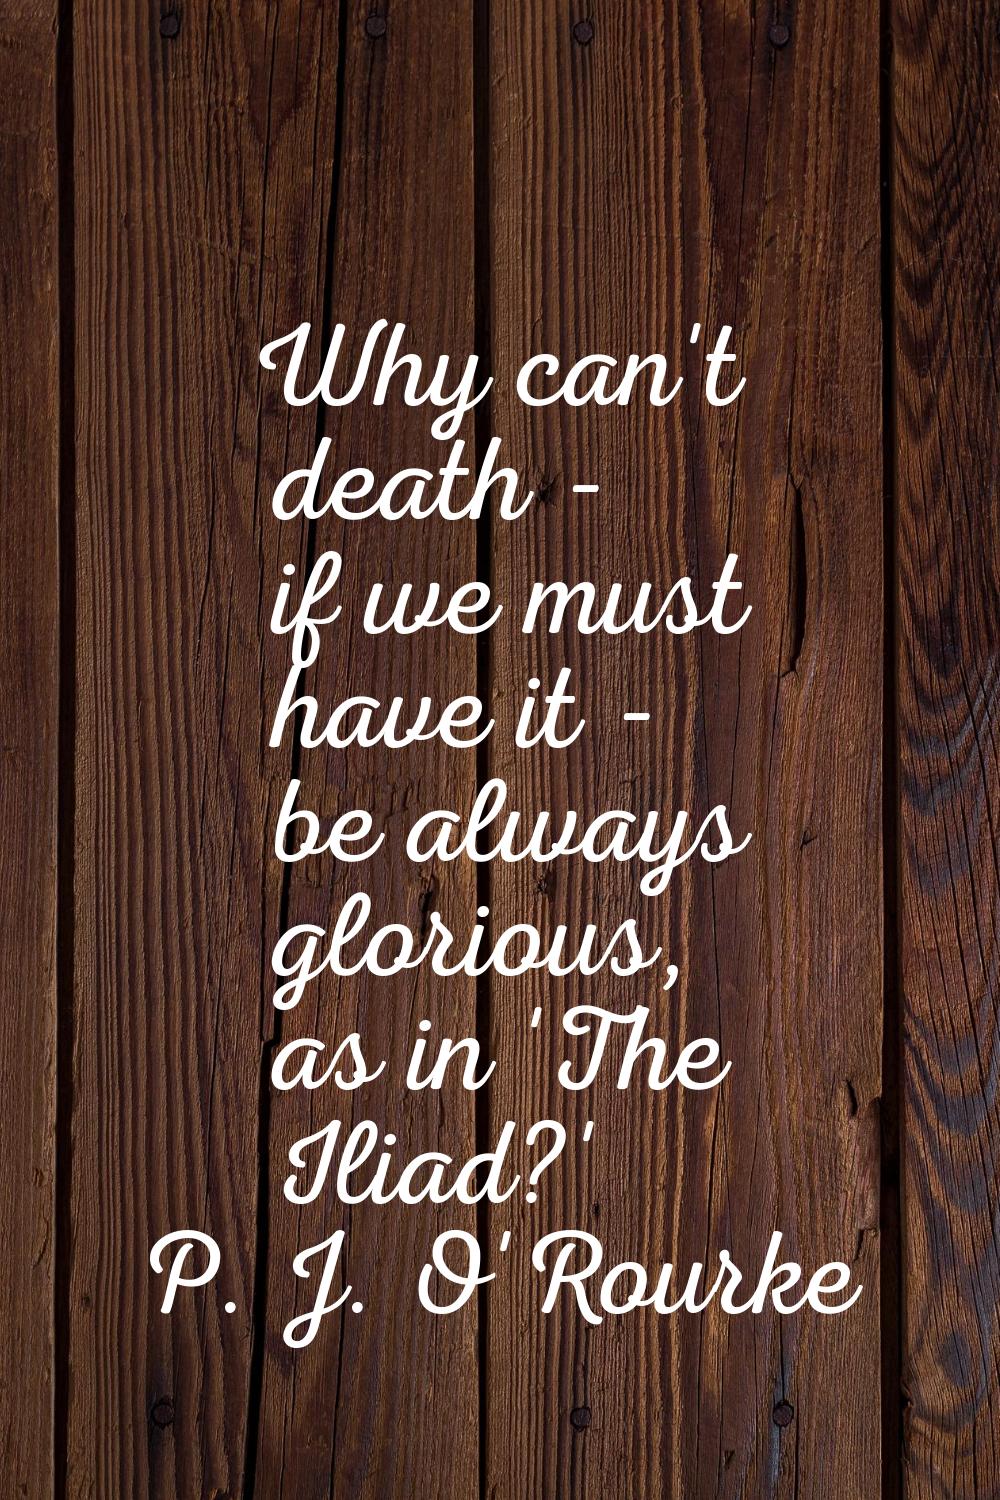 Why can't death - if we must have it - be always glorious, as in 'The Iliad?'